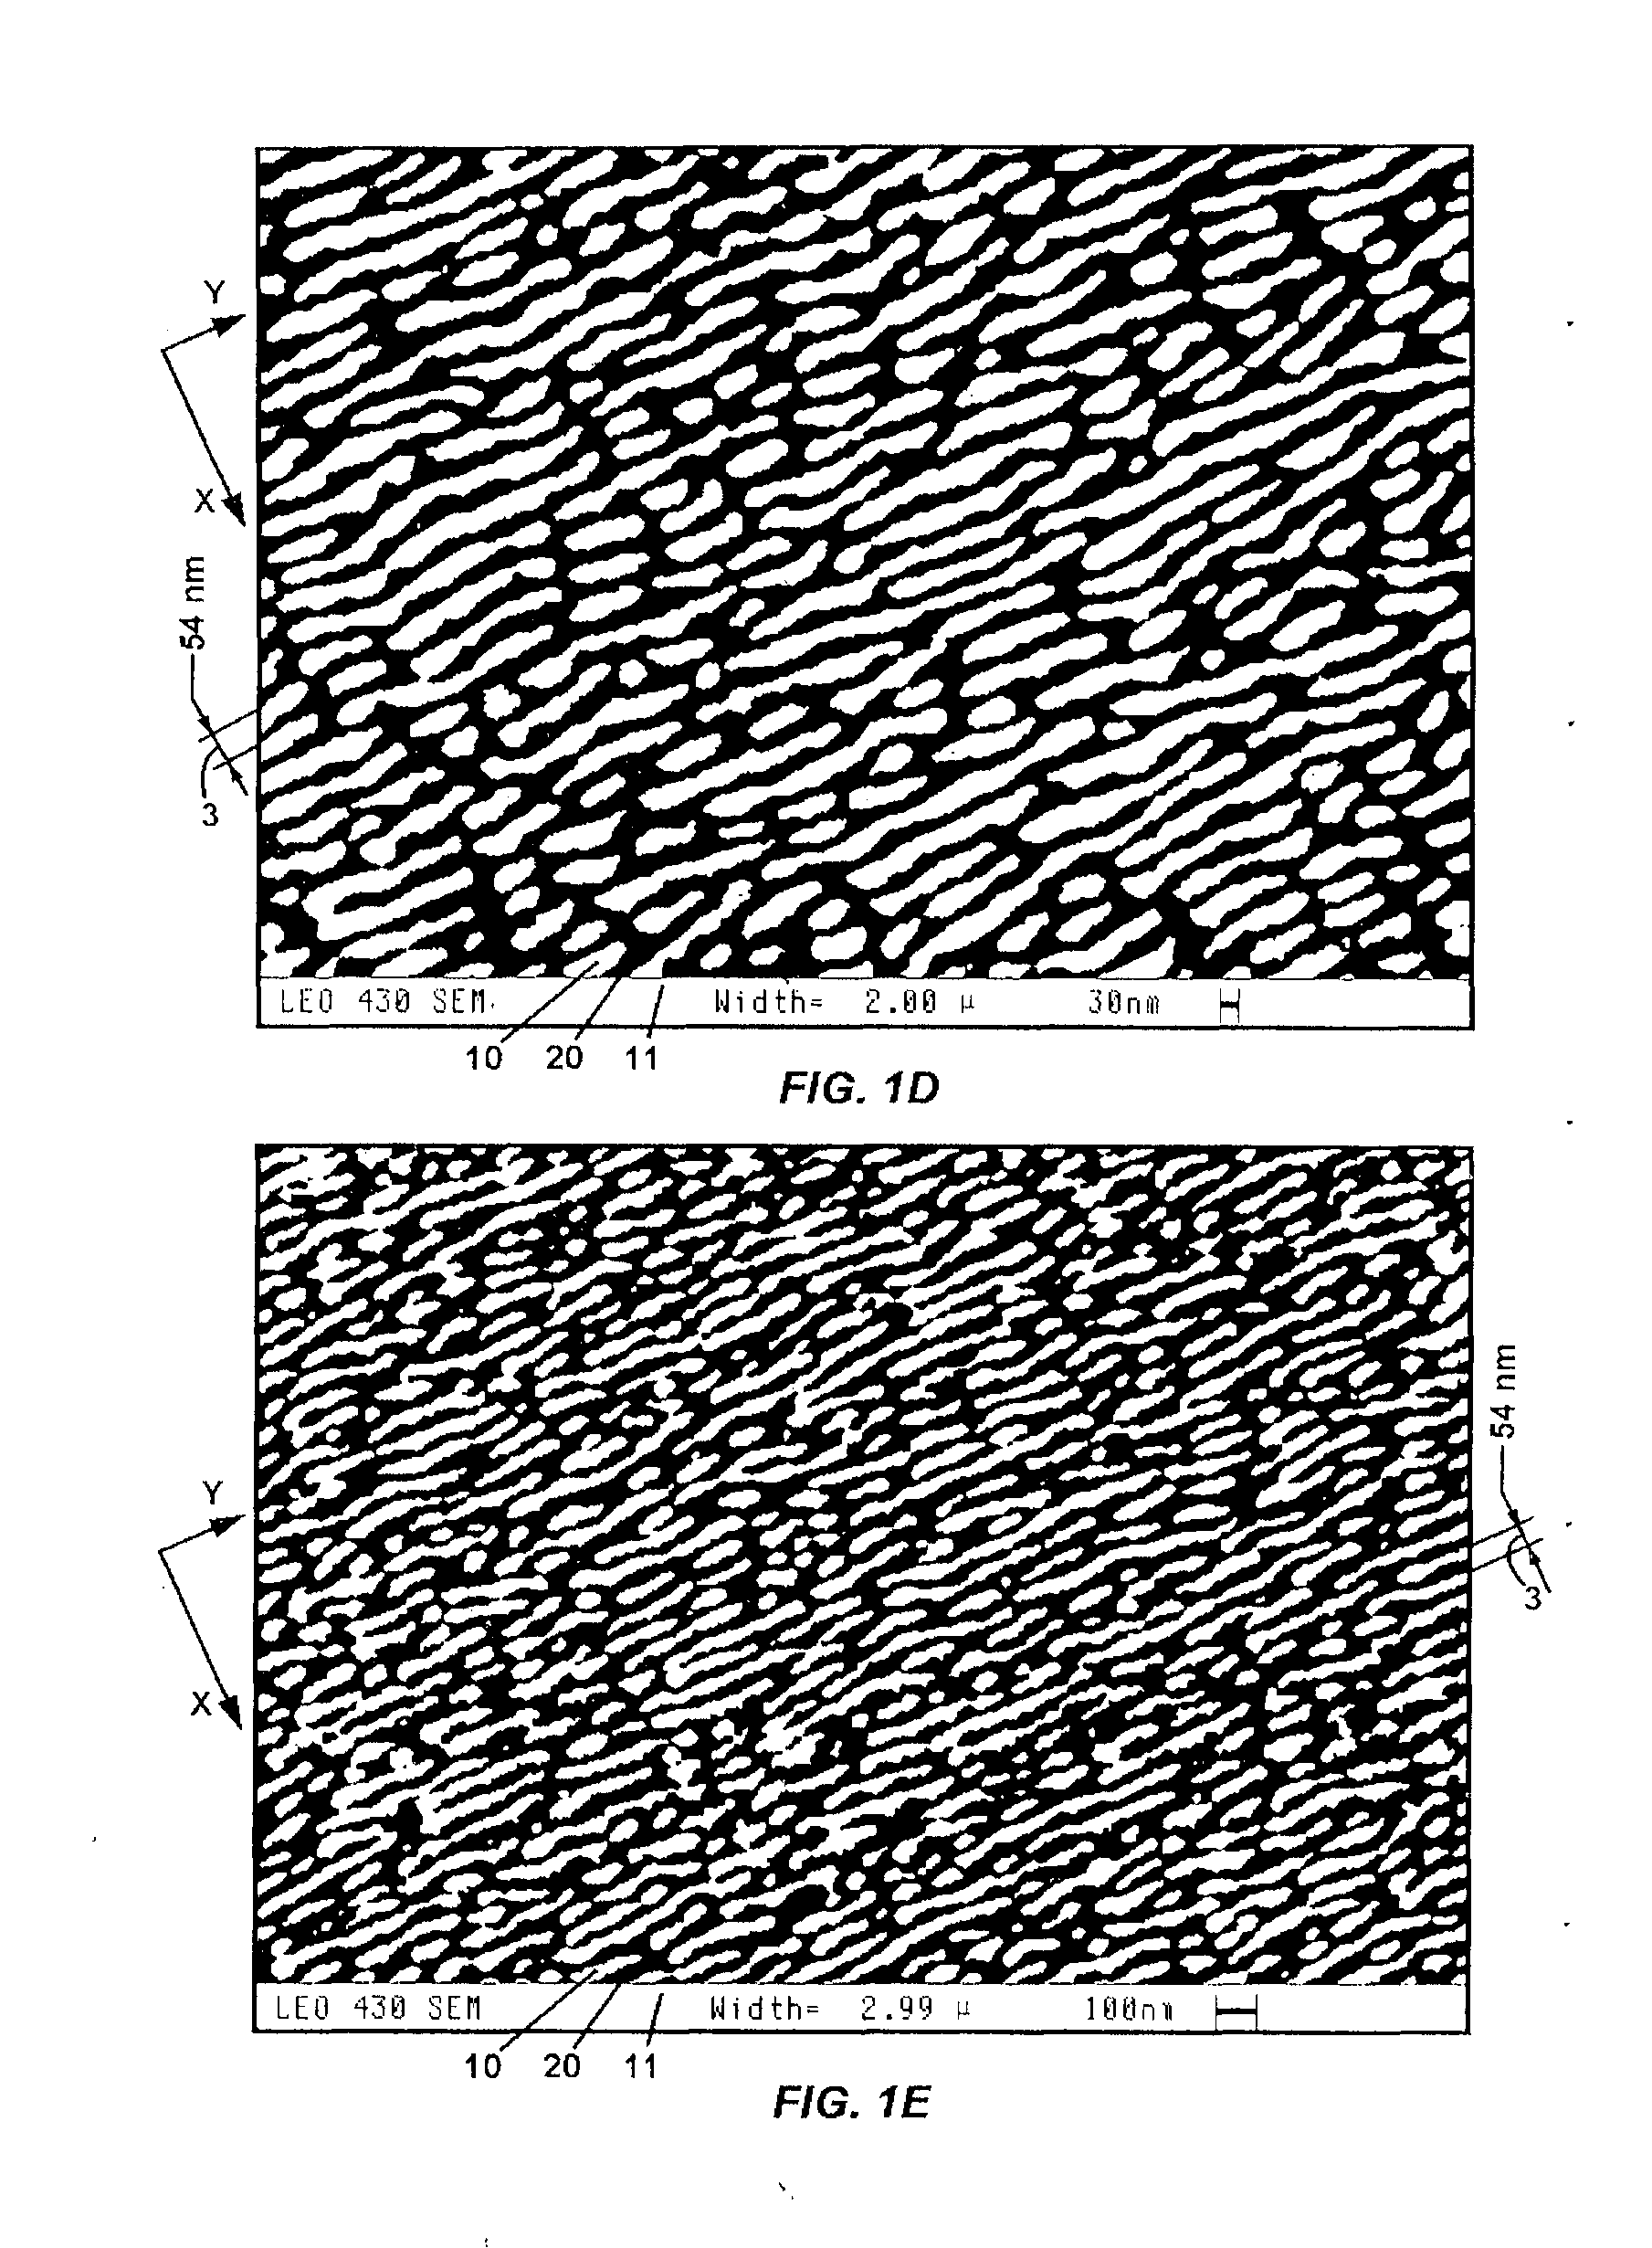 Arrangements with pyramidal features having at least one nanostructured surface and methods of making and using